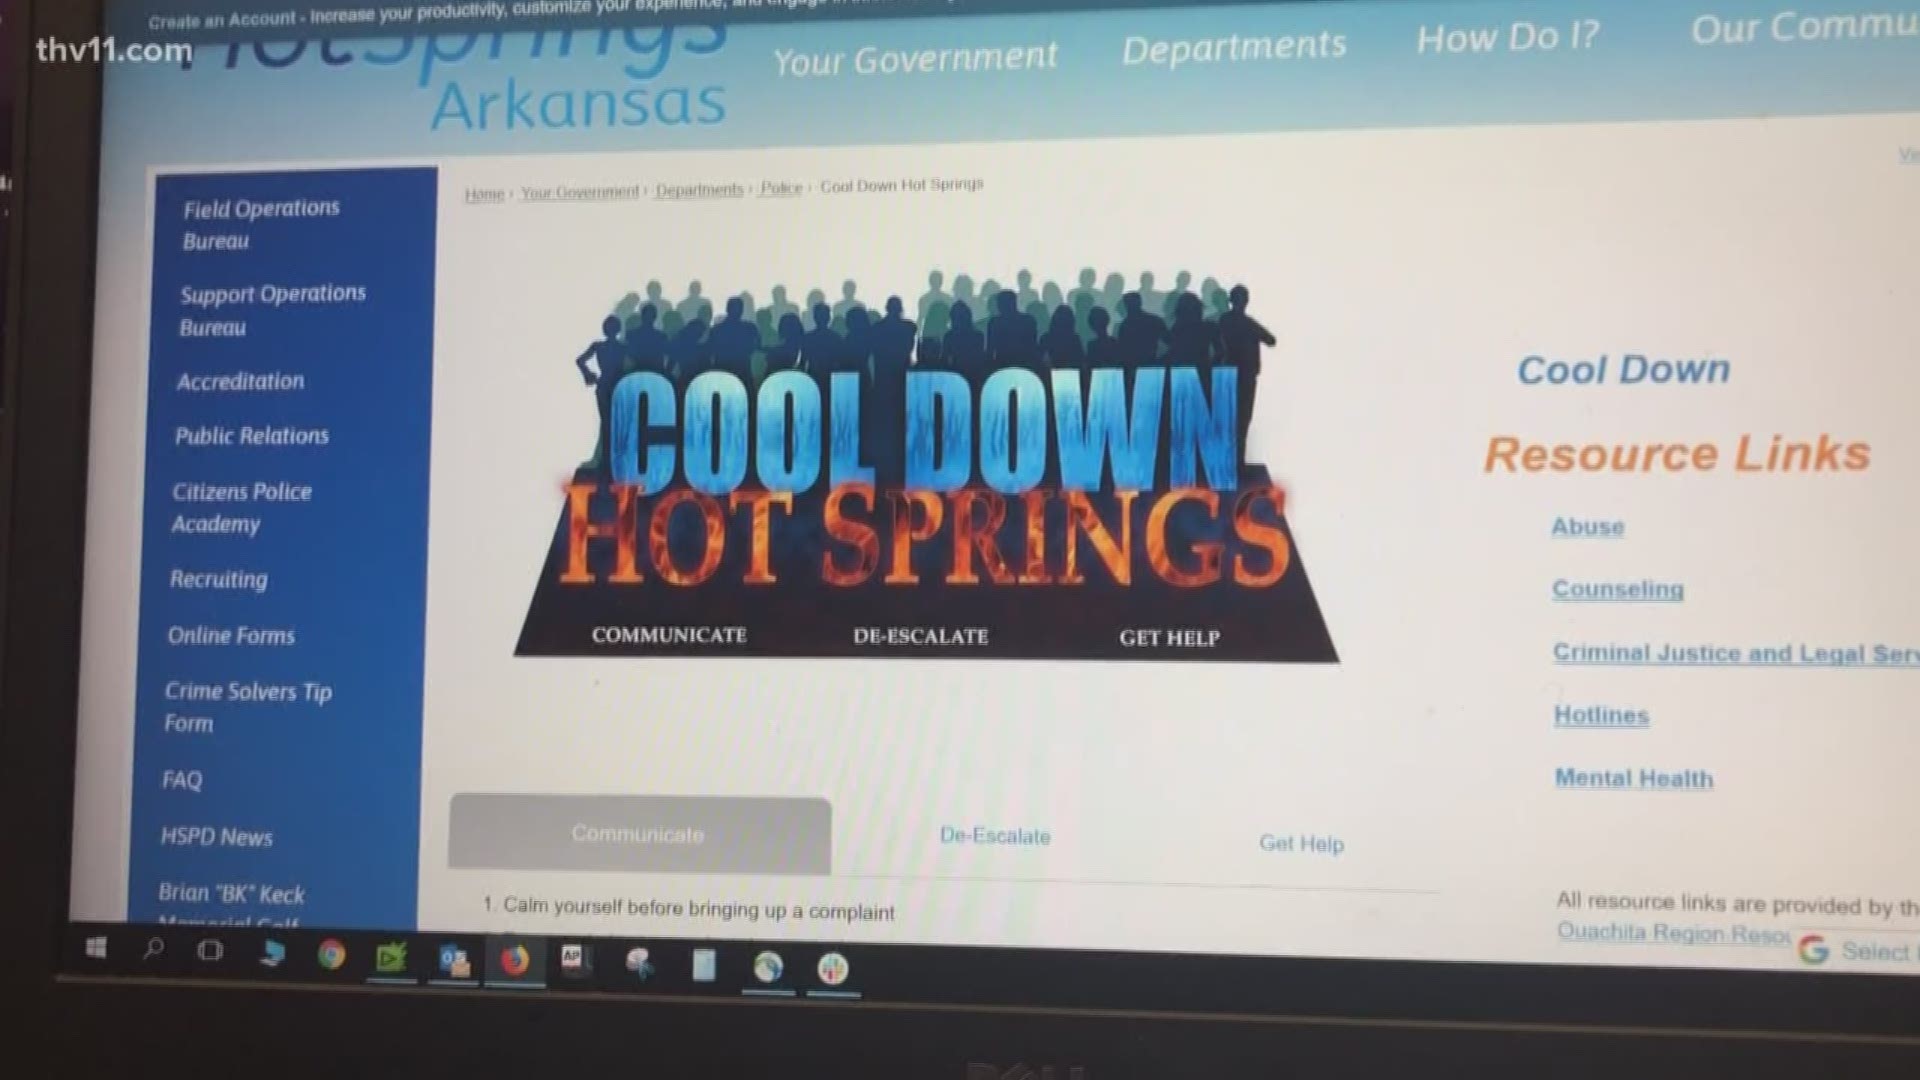 It has already been an abnormally violent time in Hot Springs this season, but the police are taking to the web to try to cool the tension.